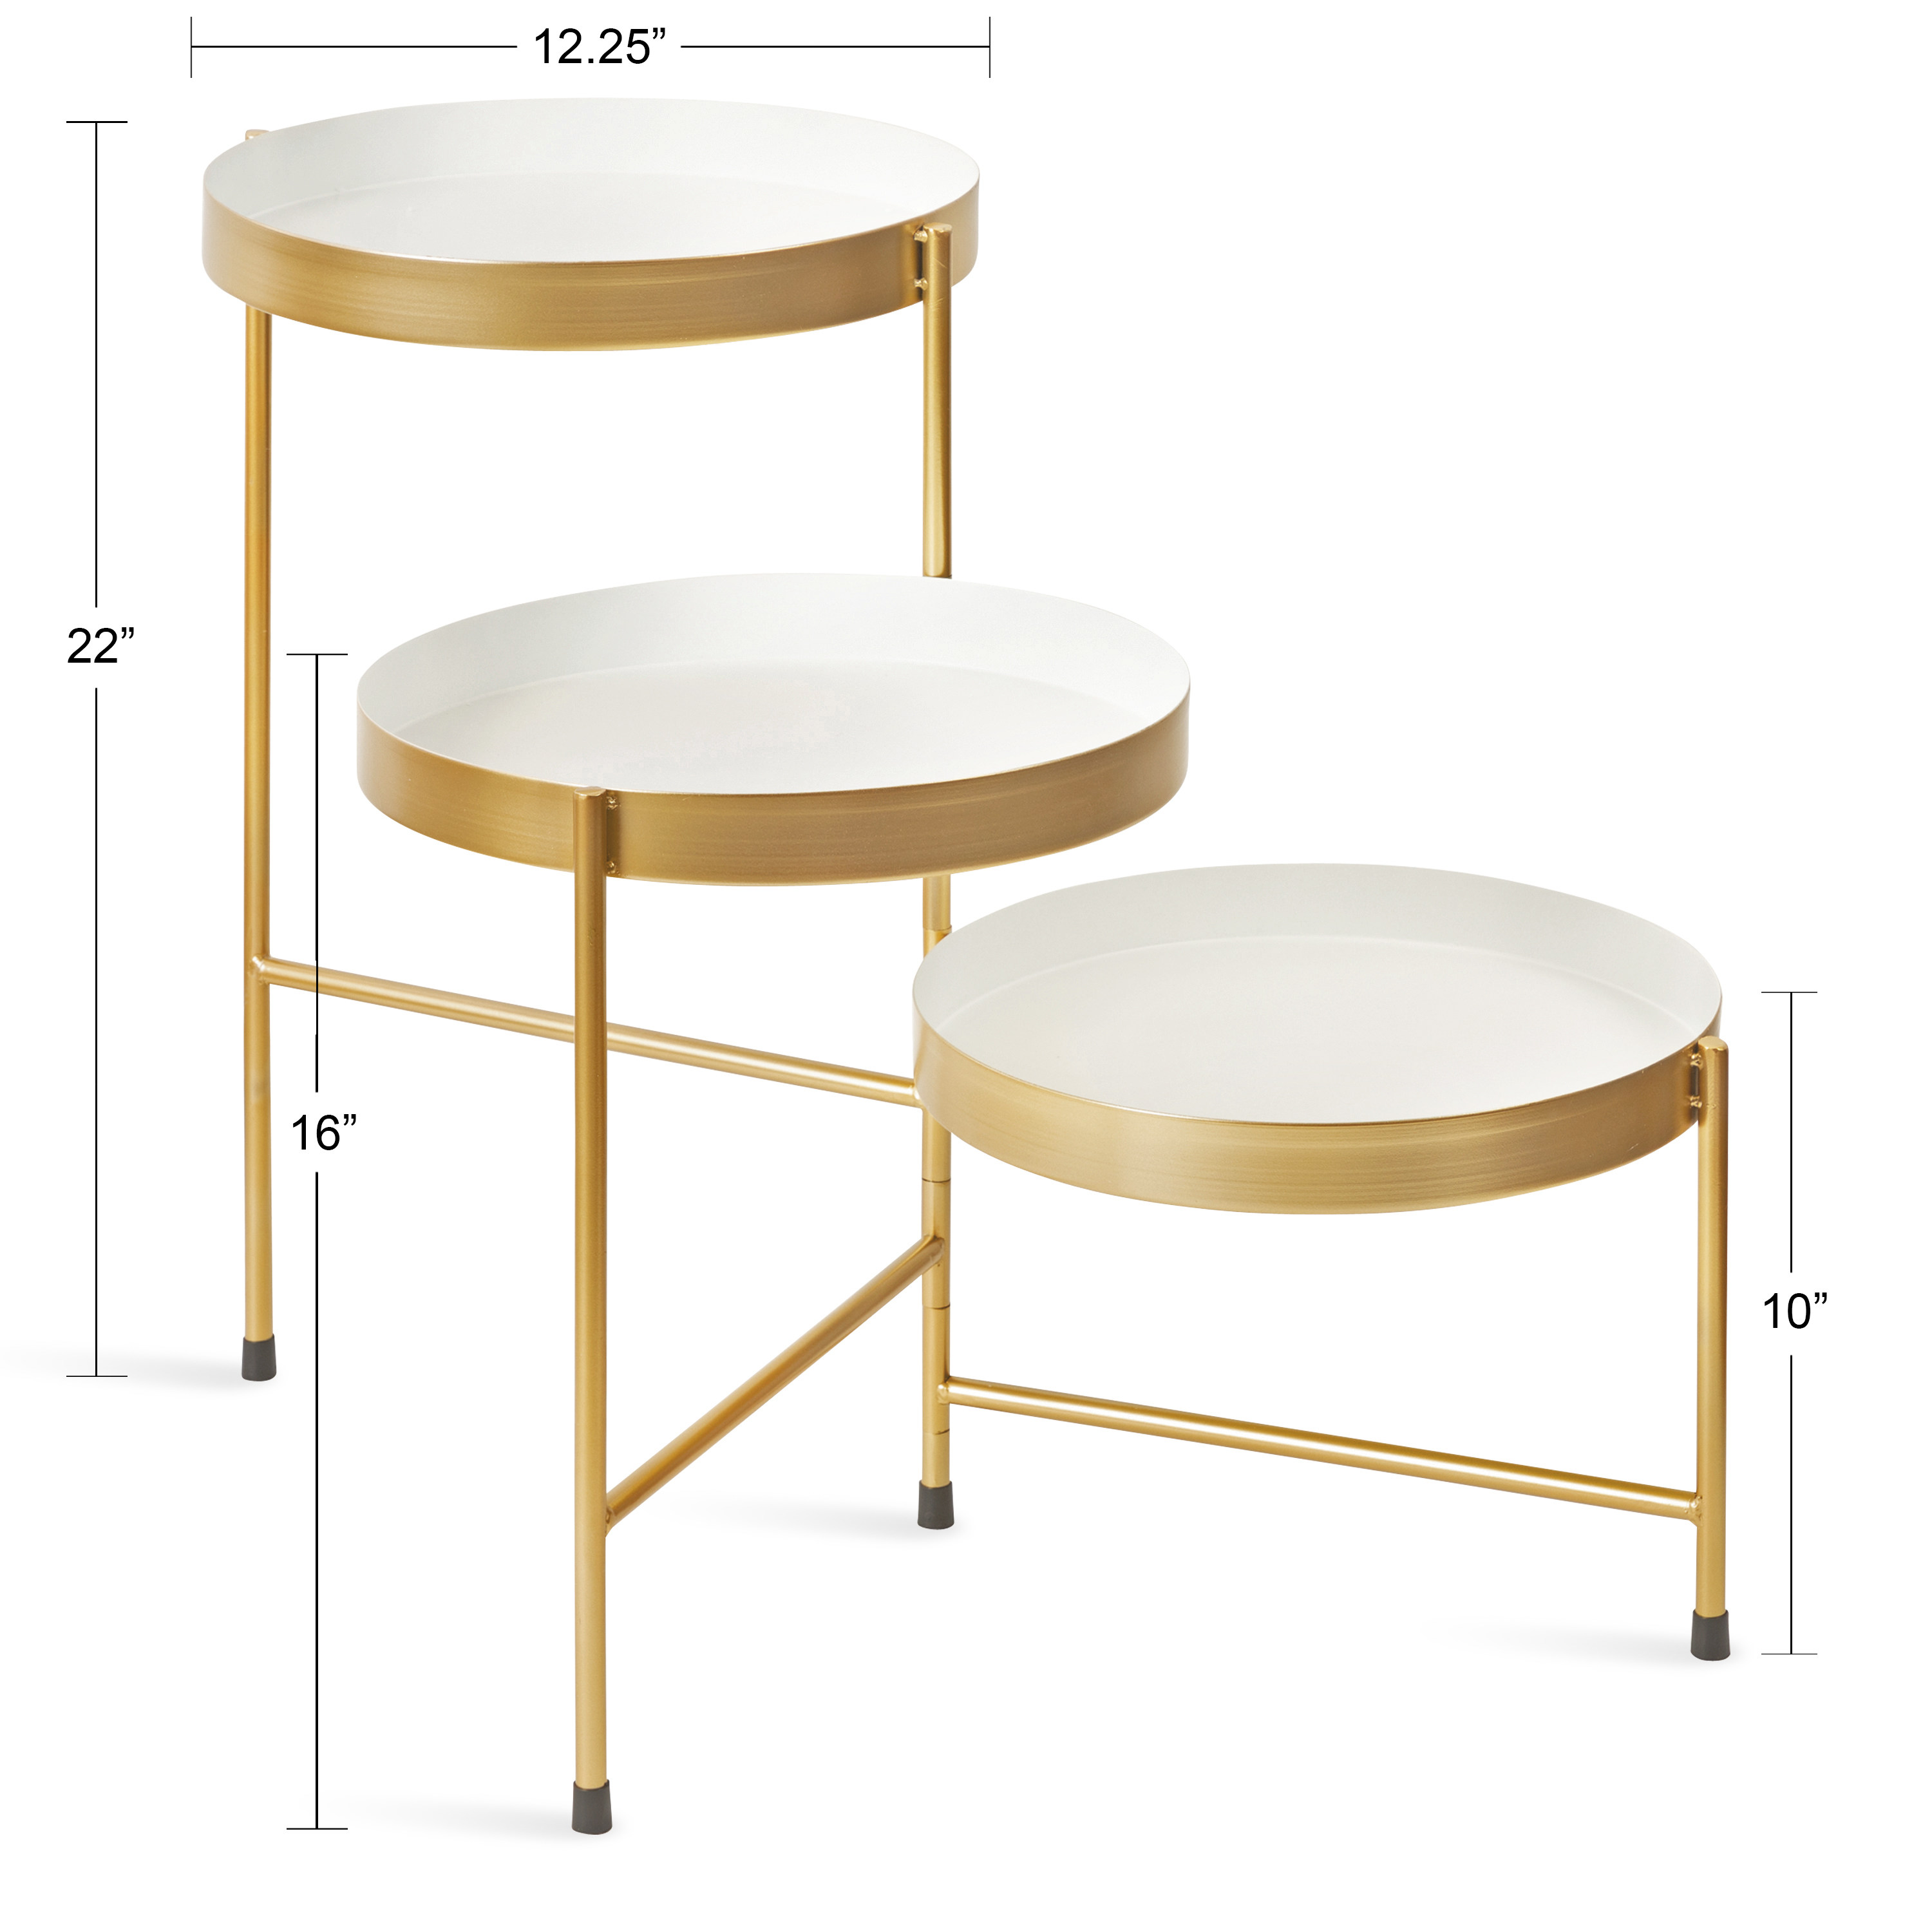 Kate and Laurel Finn Modern 3 Tiered Plant Stand, 13 x 13 x 22, White and Gold, Two Tone Folding Plant Stand for Storage and Display - image 3 of 7